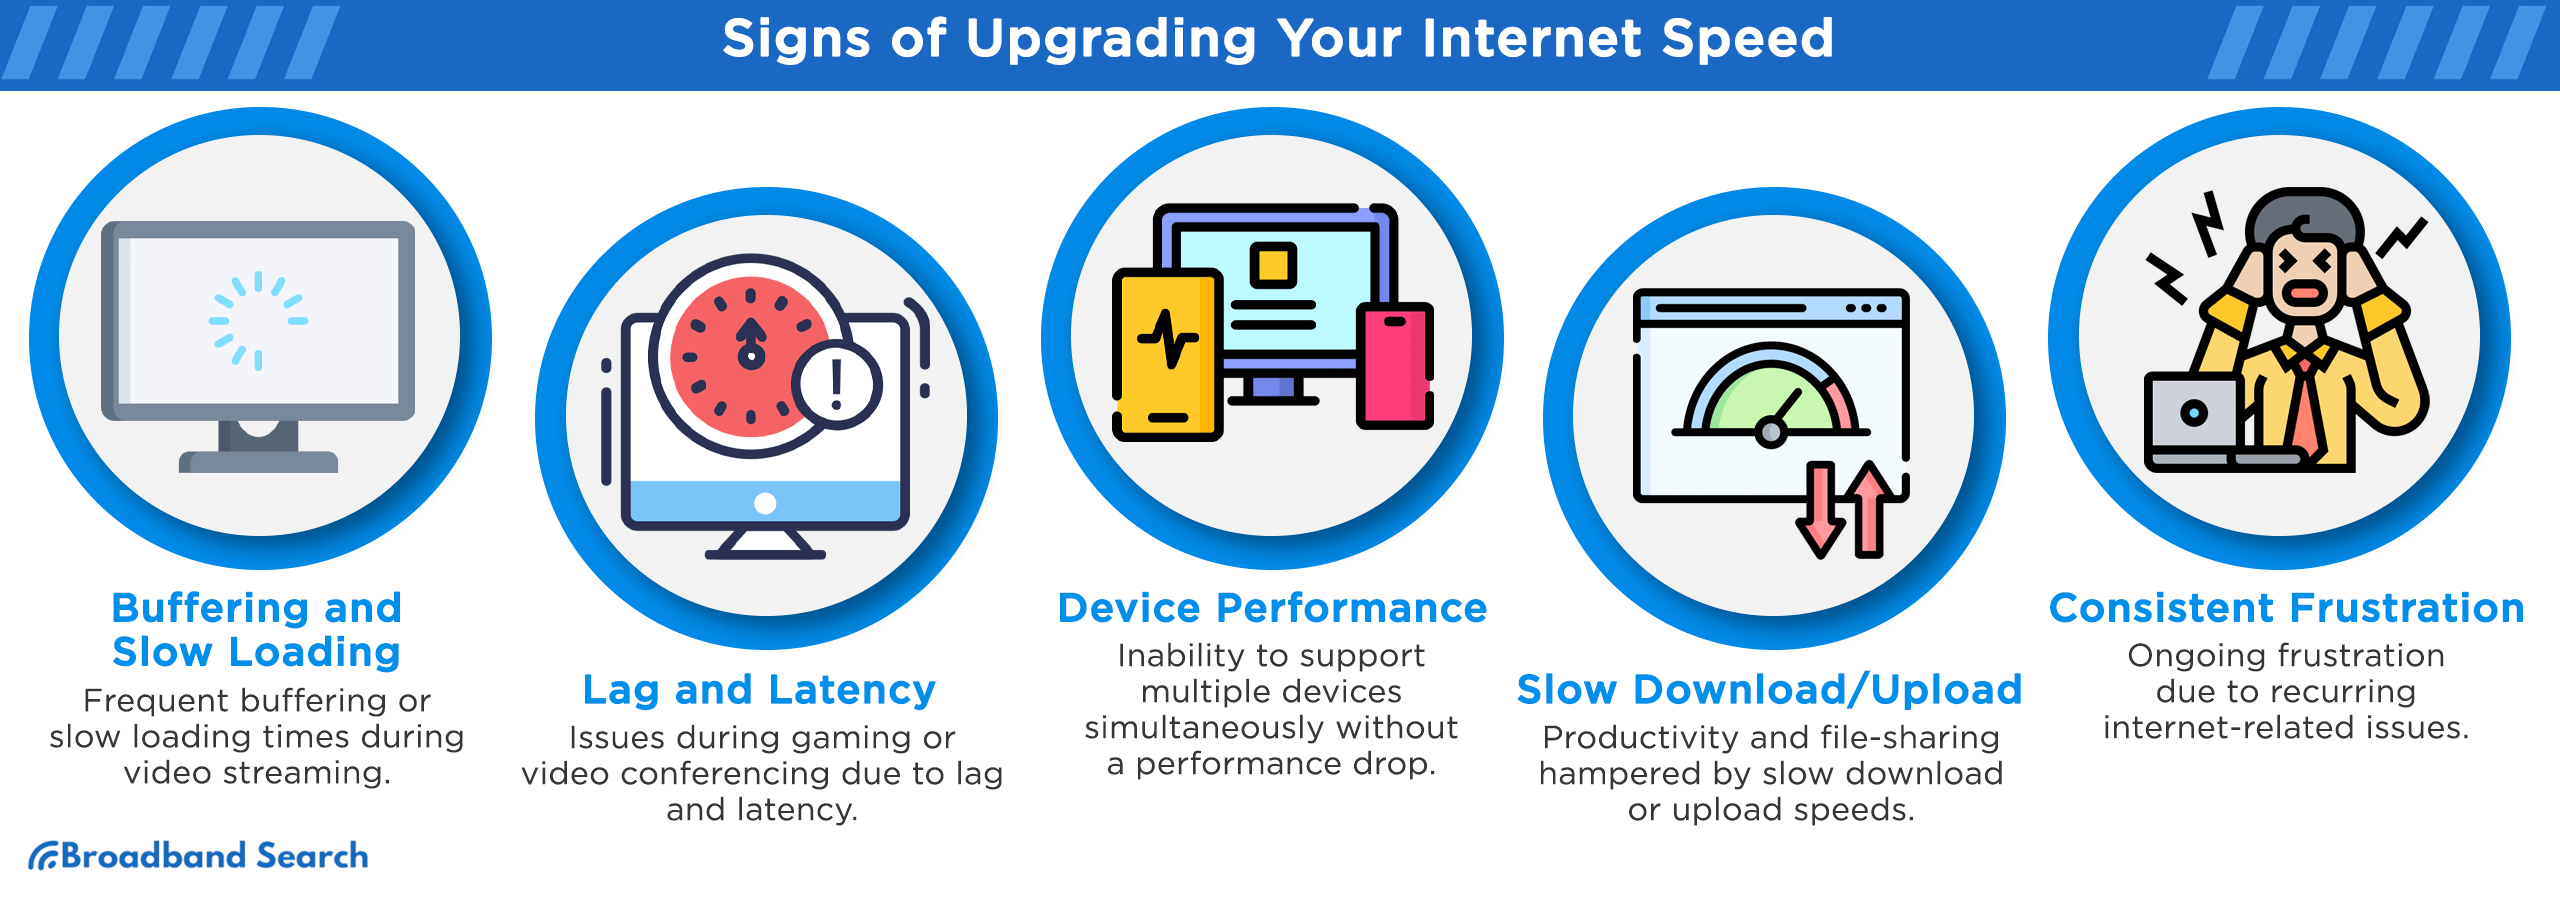 Signs to look out for when its time to upgrade your internet speed